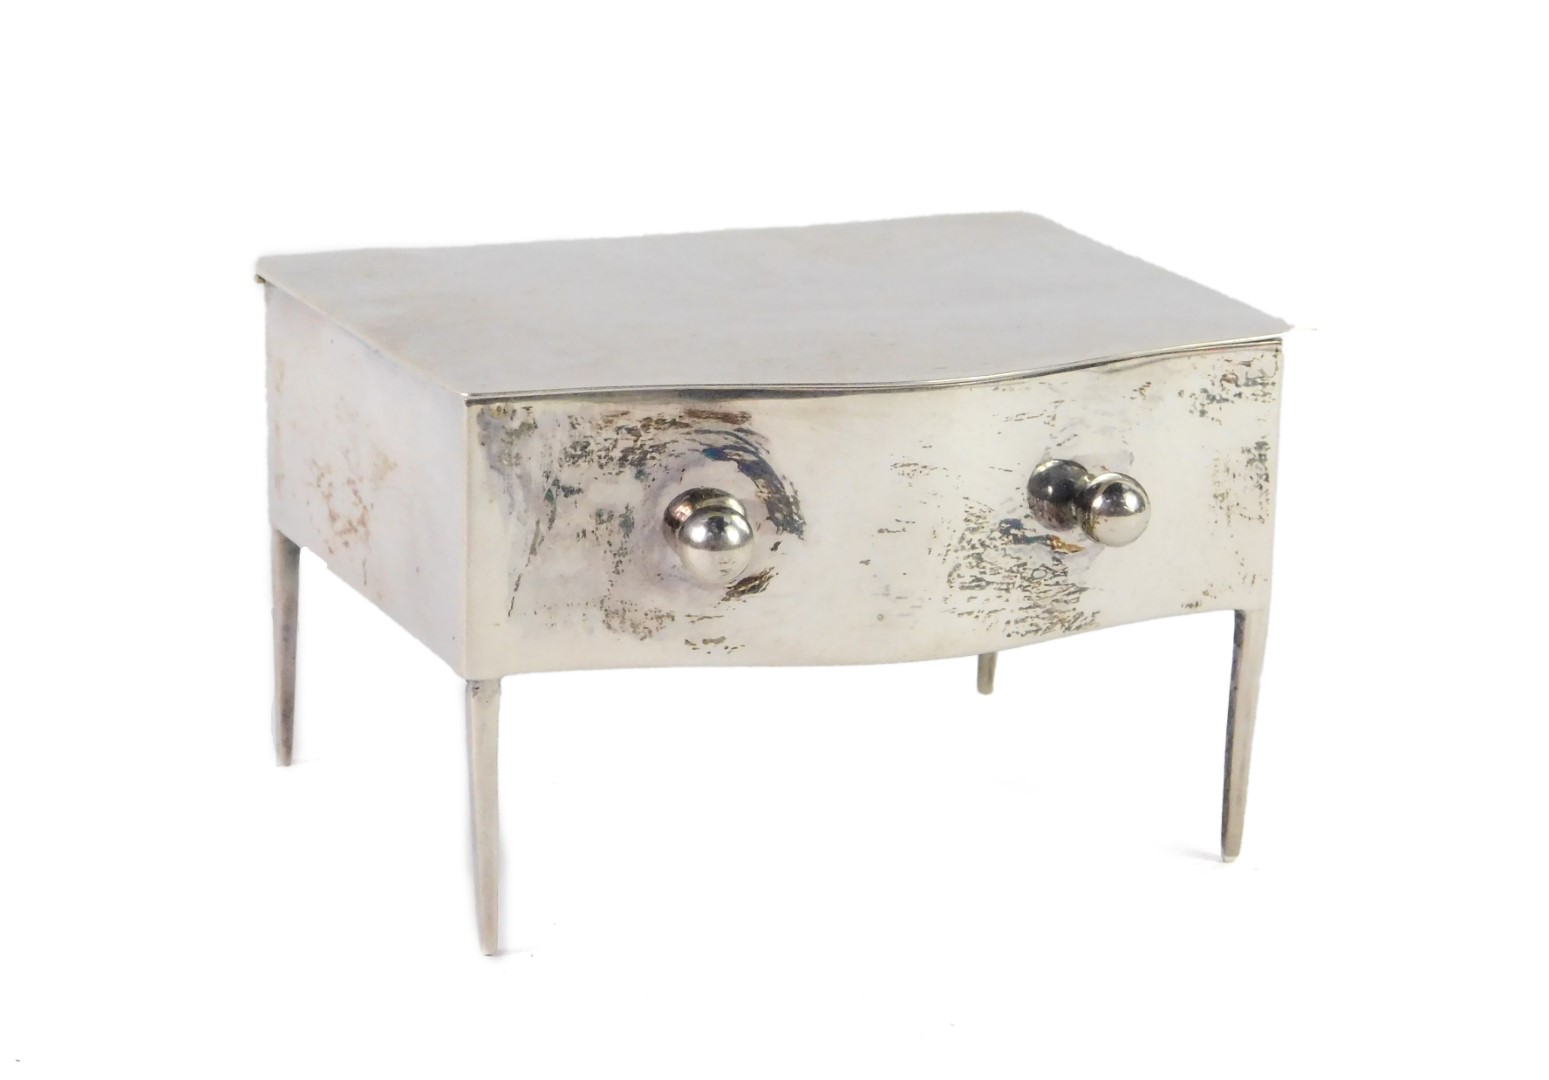 A George V silver novelty jewellery case, modelled as a serpentine fronted table, the hinge lid